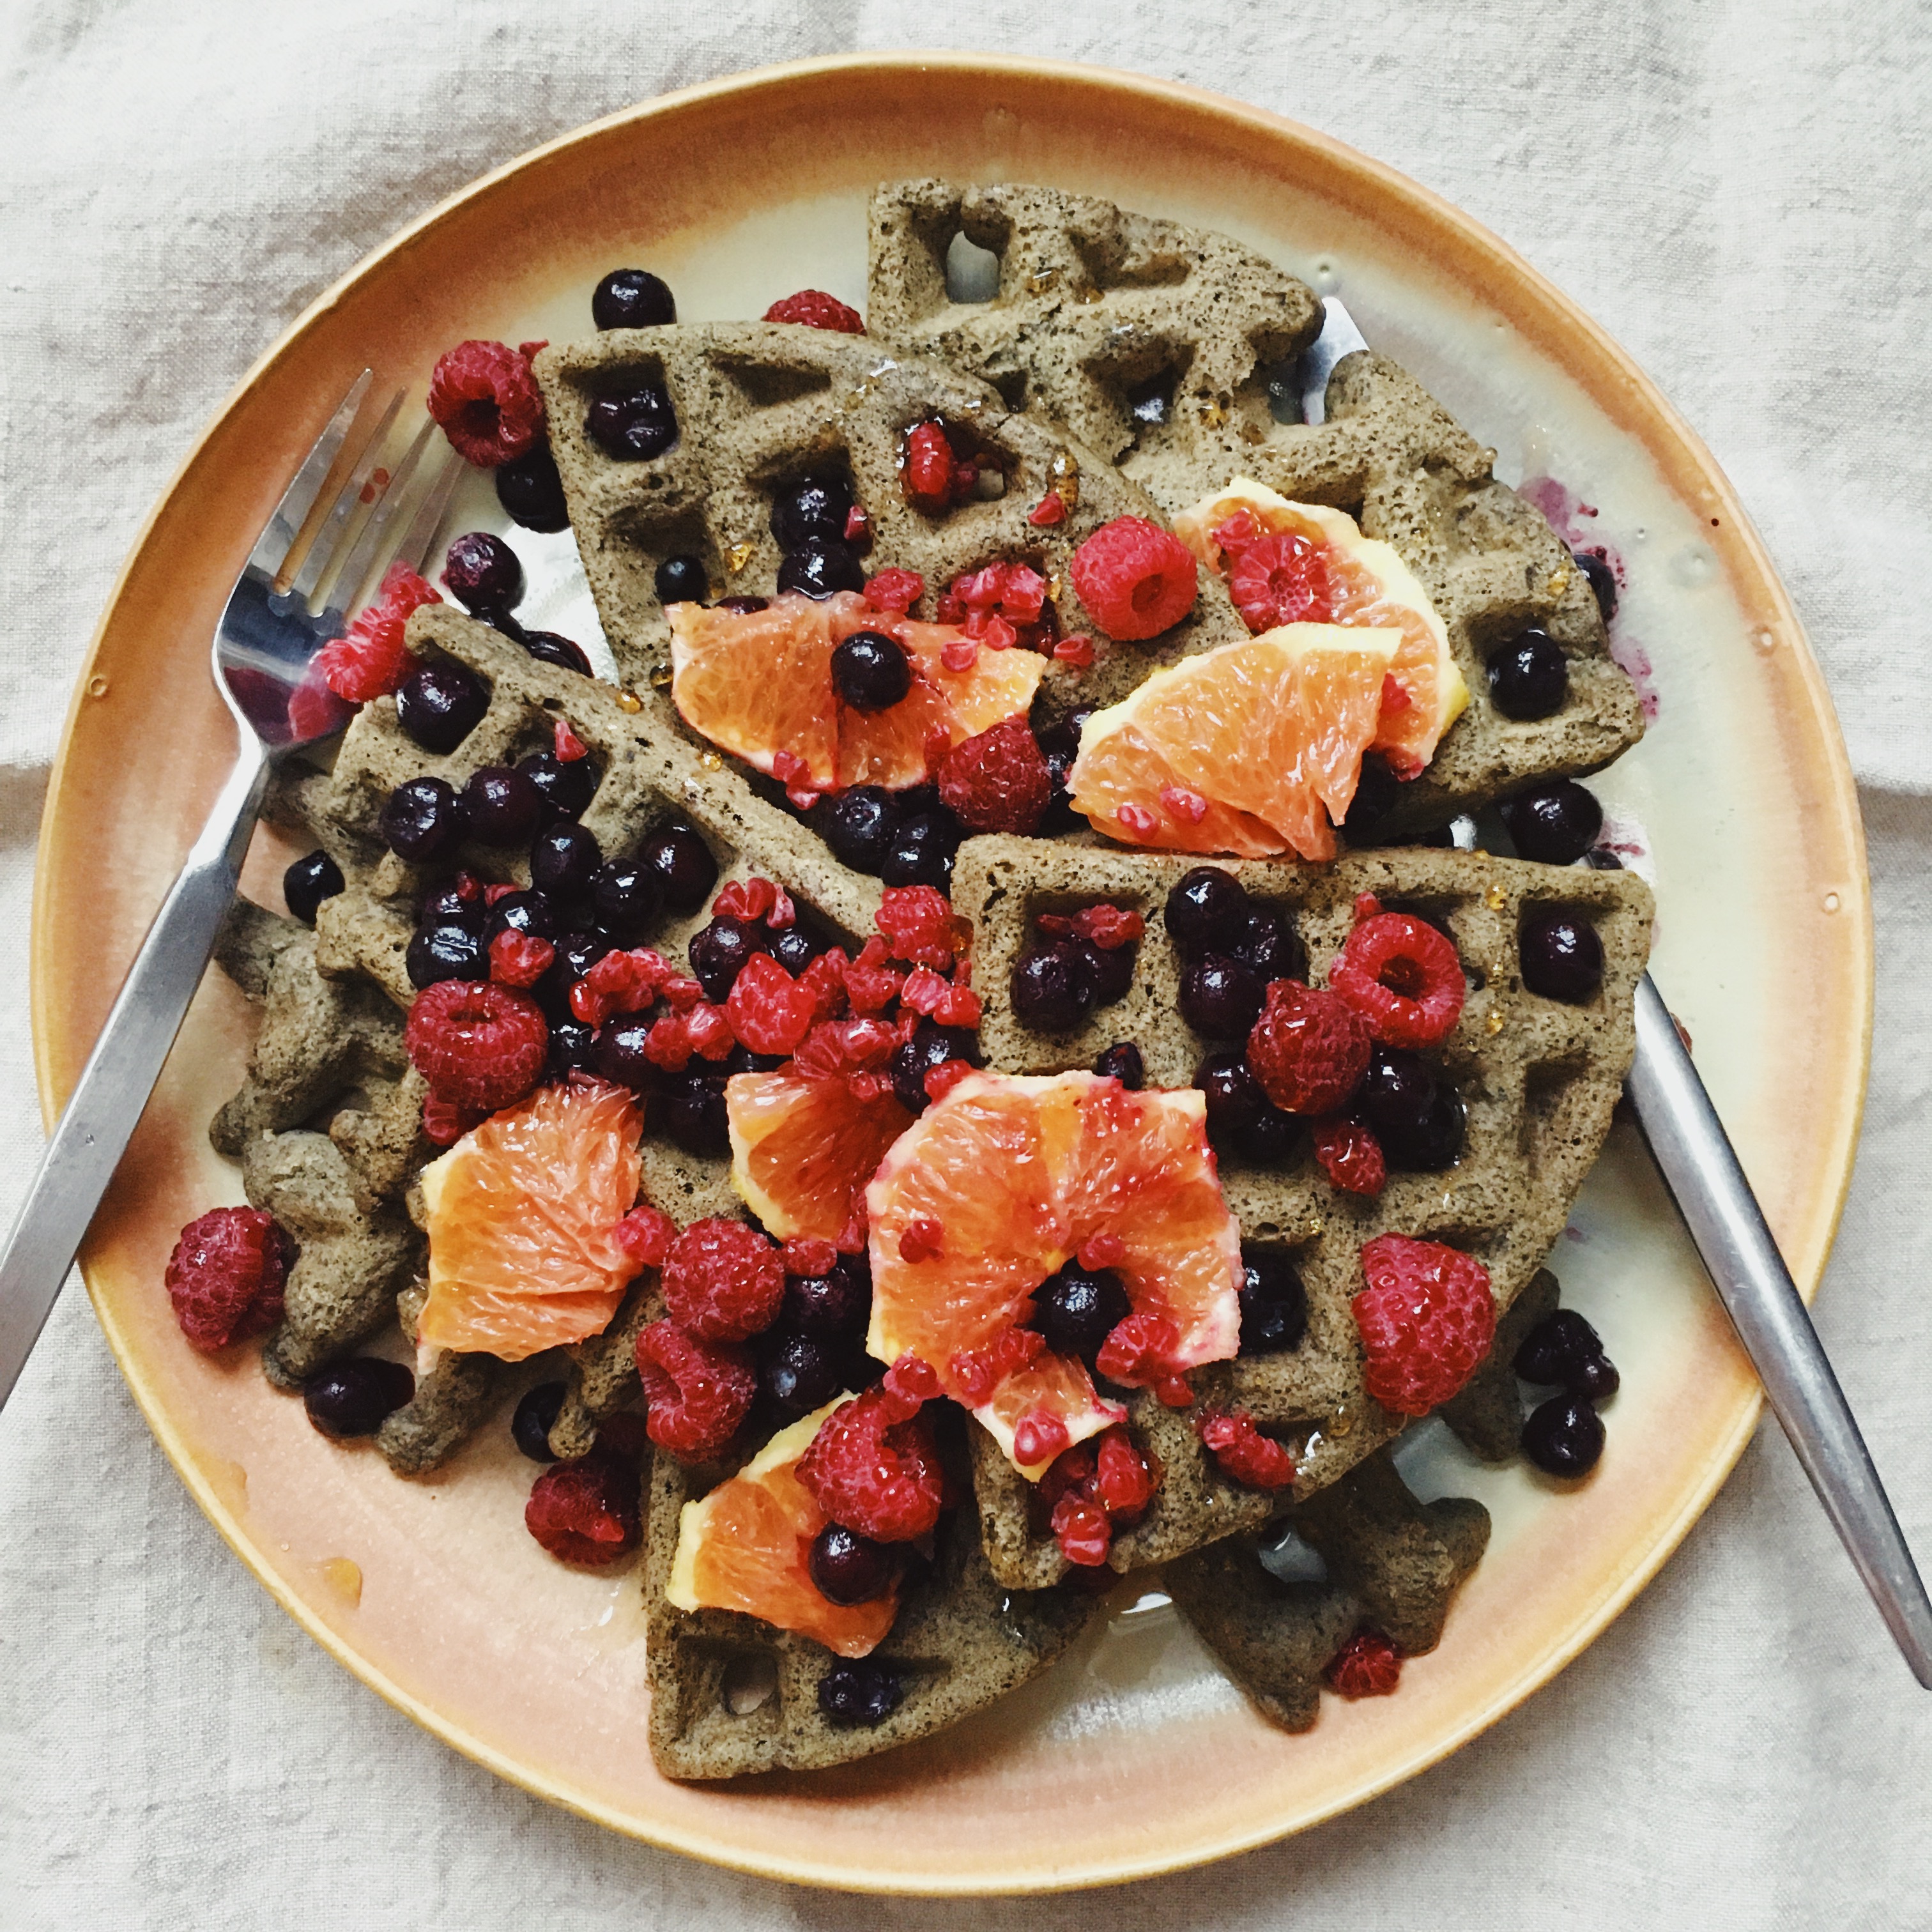 These gluten free buckwheat waffles are delicious.